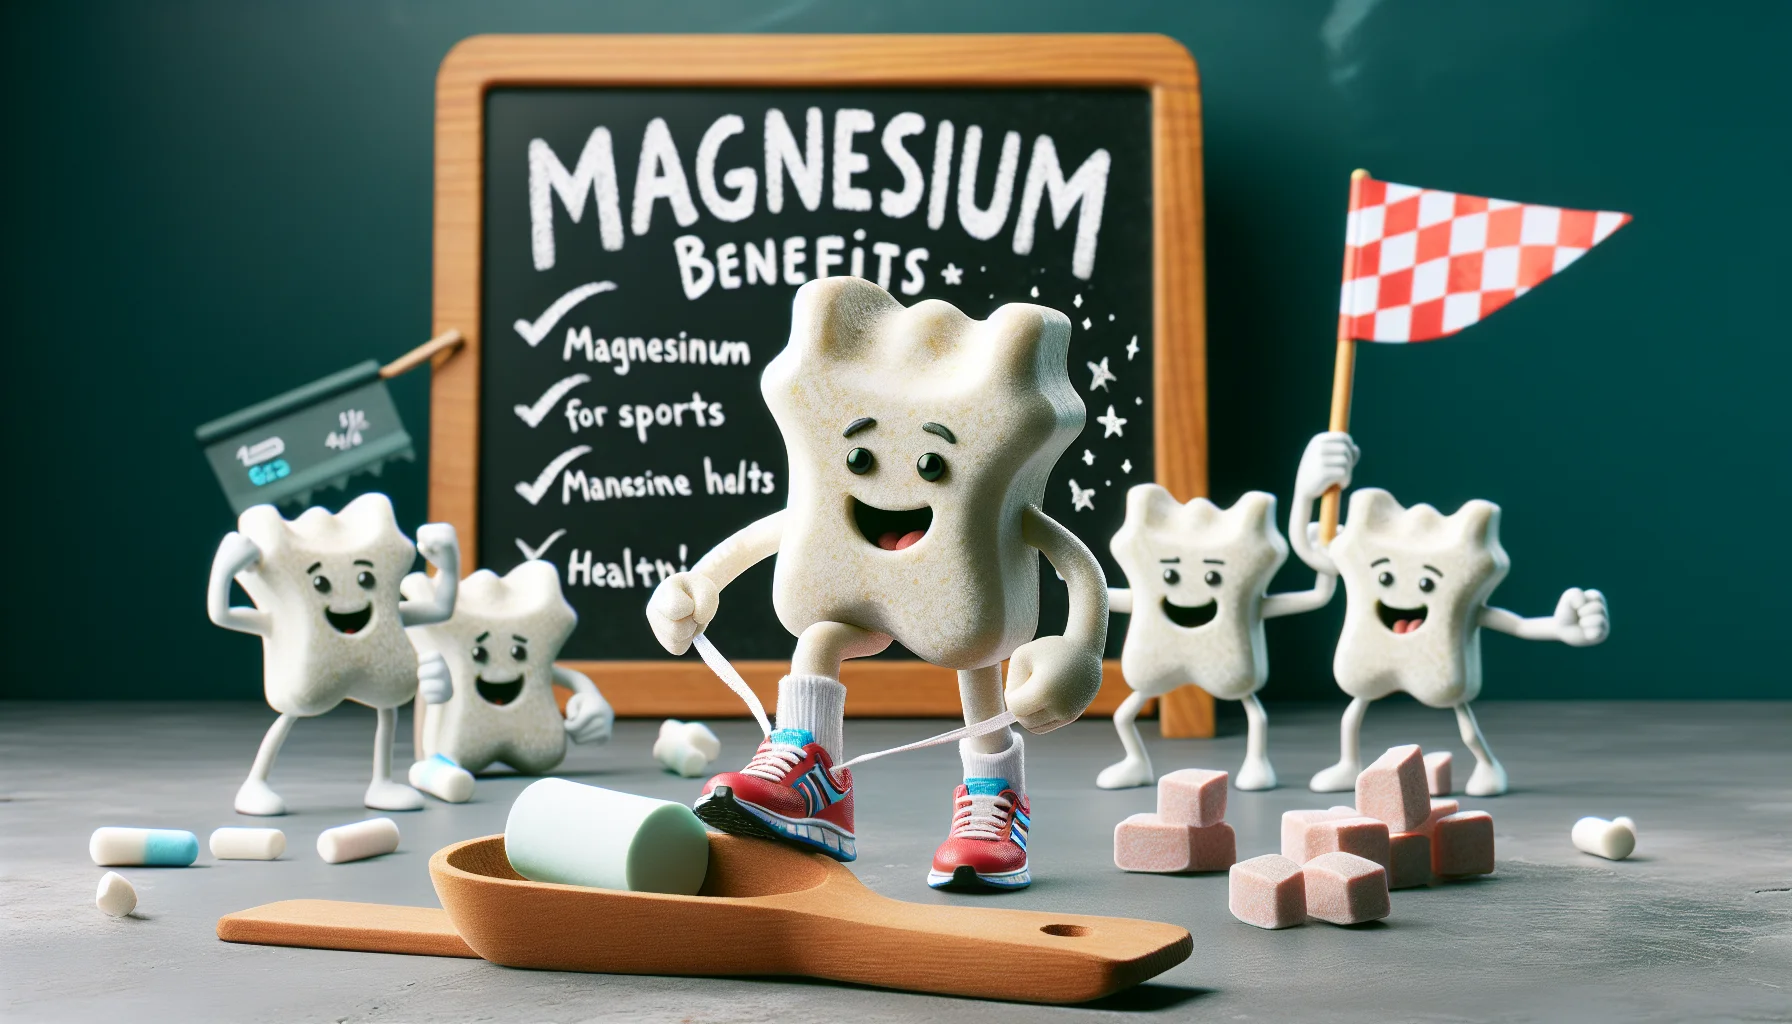 Create an image of a humorous scenario featuring magnesium chews as its stars. In the foreground, a half-eaten piece of a magnesium chew with cartoonish flexed arms is lacing up its tiny running shoes, ready to partake in a race. Surrounding it are other uneaten magnesium chews, cheering on with miniature pennants waving. In the background, there's a chalkboard with fun facts about magnesium benefits for sports and health, enticing viewers to incorporate supplements into their routine. Please add a touch of realism to the scene.